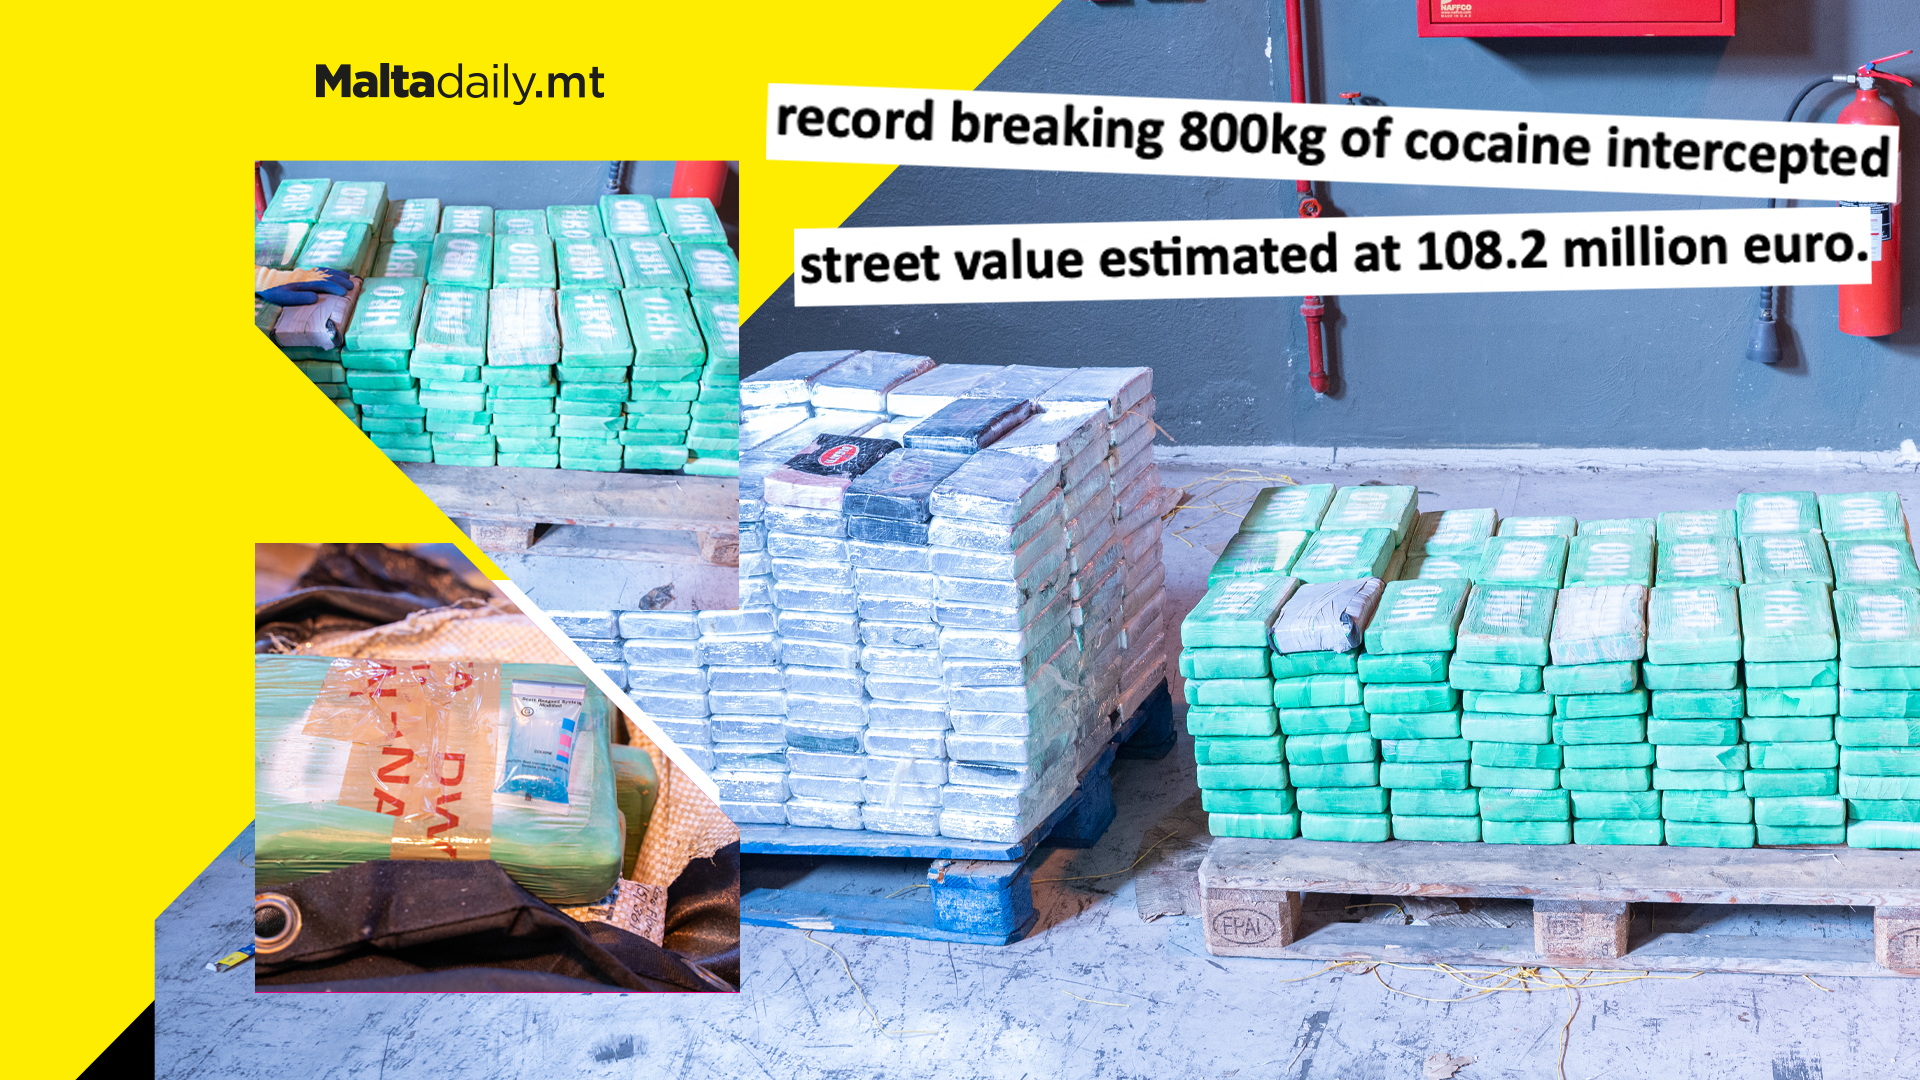 A record breaking 800kg of cocaine intercepted by Malta Customs